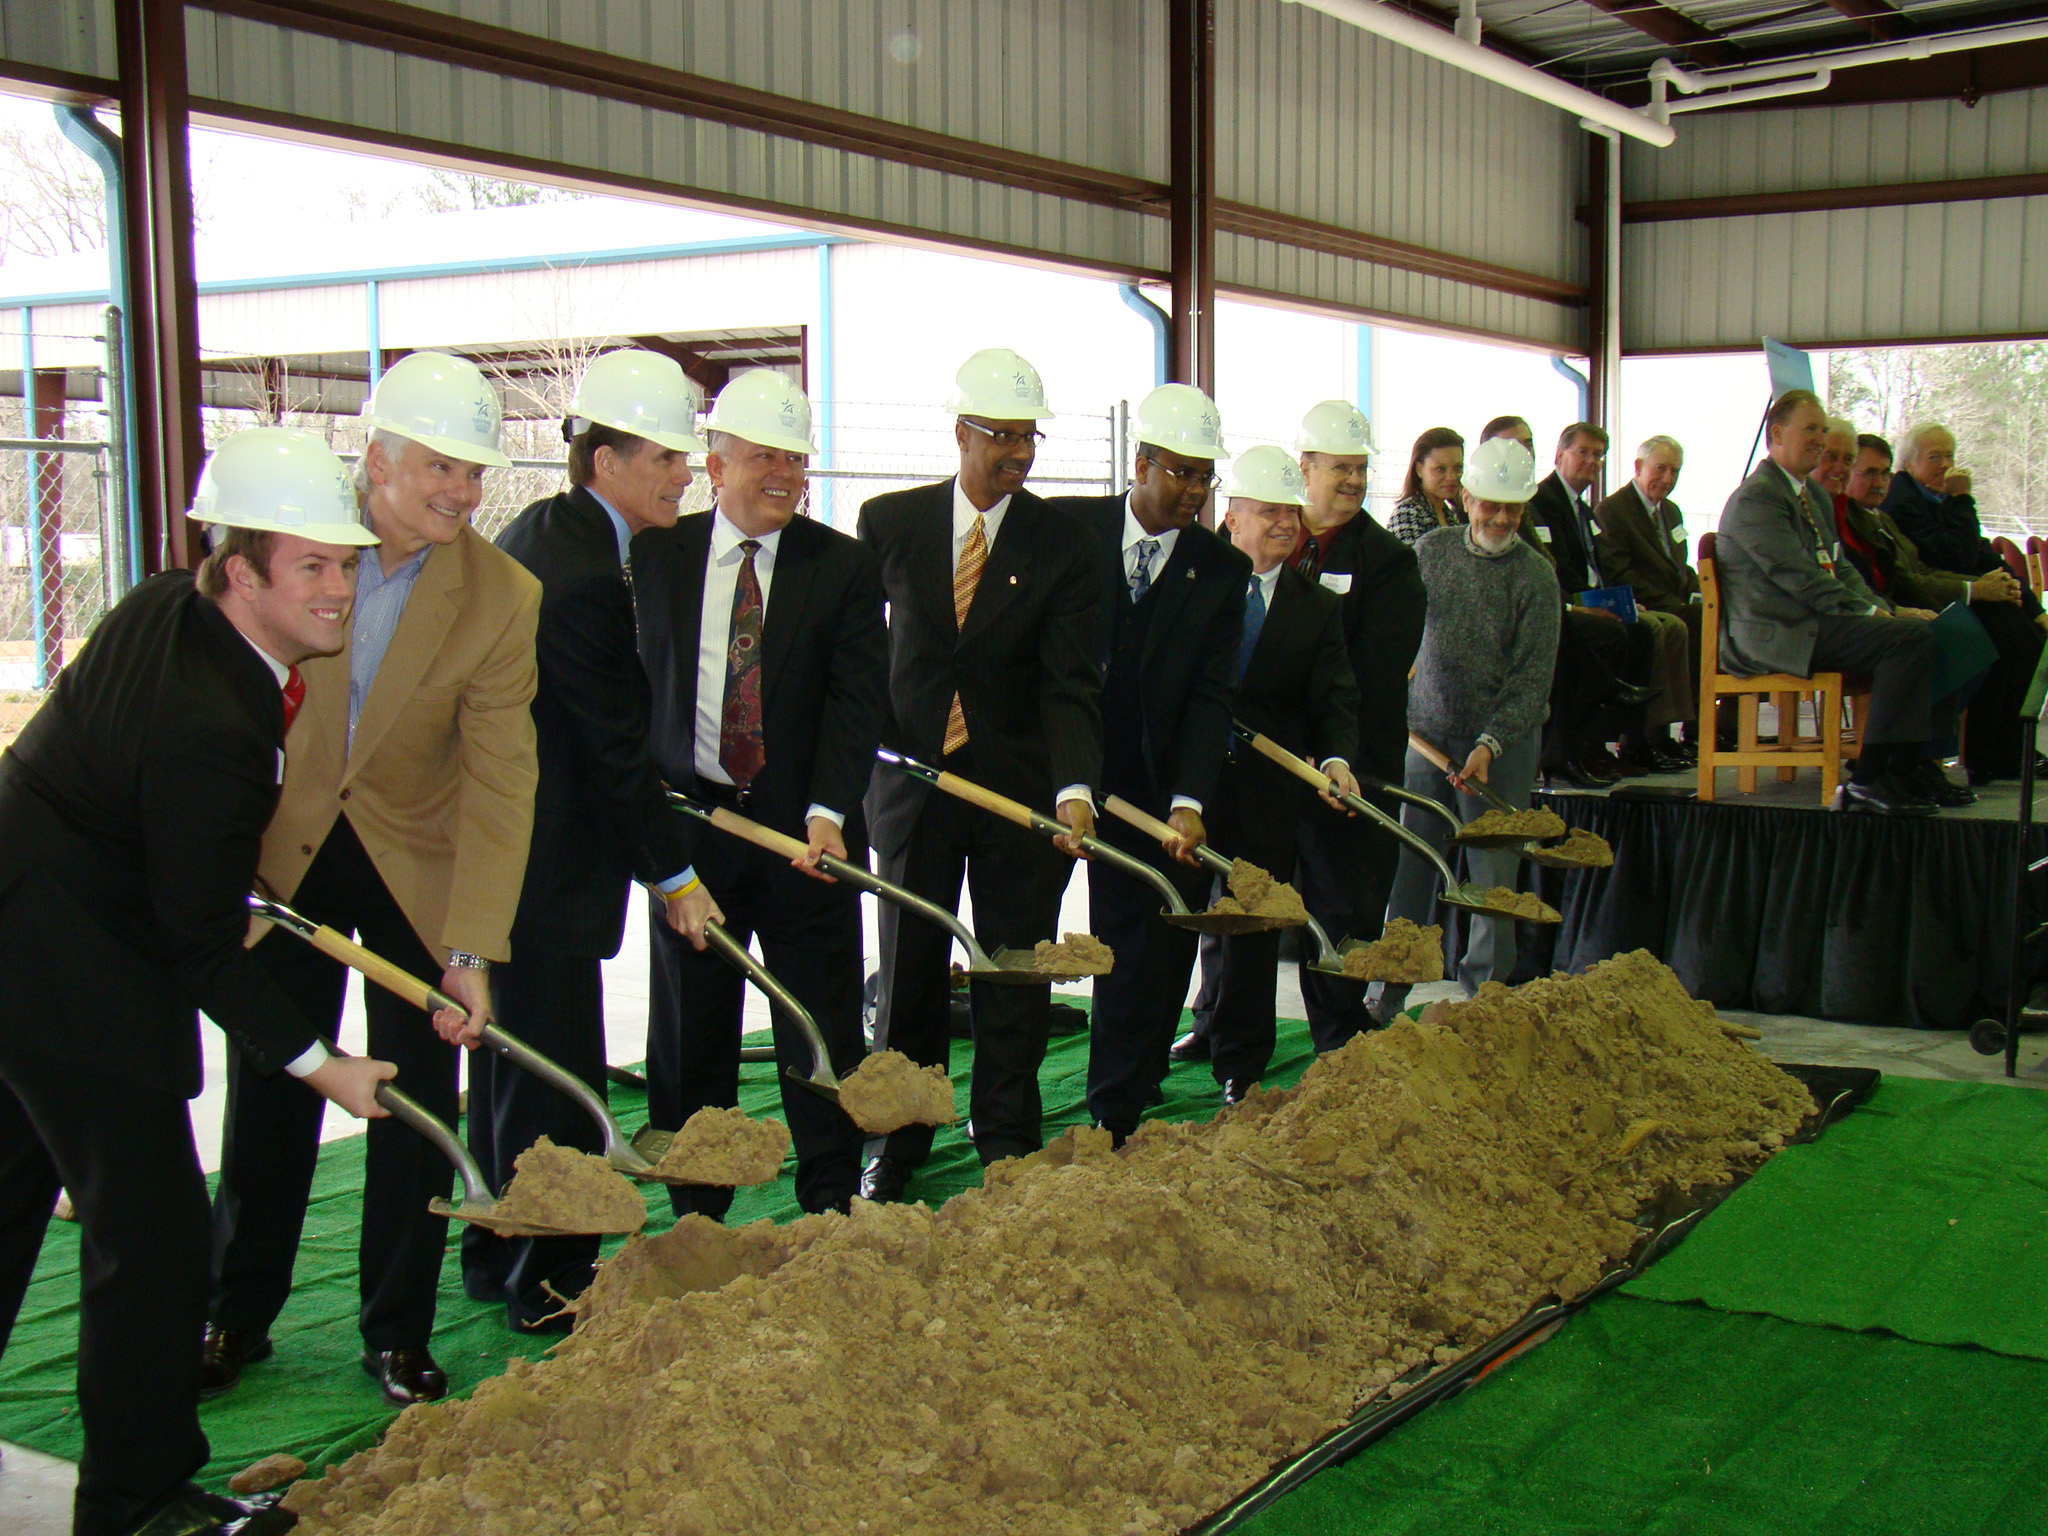 Community officials dig in at the groundbreaking ceremony for the new Lone Star College-Conroe Center campus. Pictured from left to right are: Mike Barnhill, vice chair of the Greater Conroe Economic Development Council; Roy Morton, chair of the Greater Conroe/Lake Conroe Area Chamber of Commerce; Dr. Richard G. Carpenter, chancellor of LSCS; Dr. Austin A. Lane, president of LSC-Montgomery; Alan Barb Sadler, Montgomery County Judge; and Webb Melder, mayor of the City of Conroe.